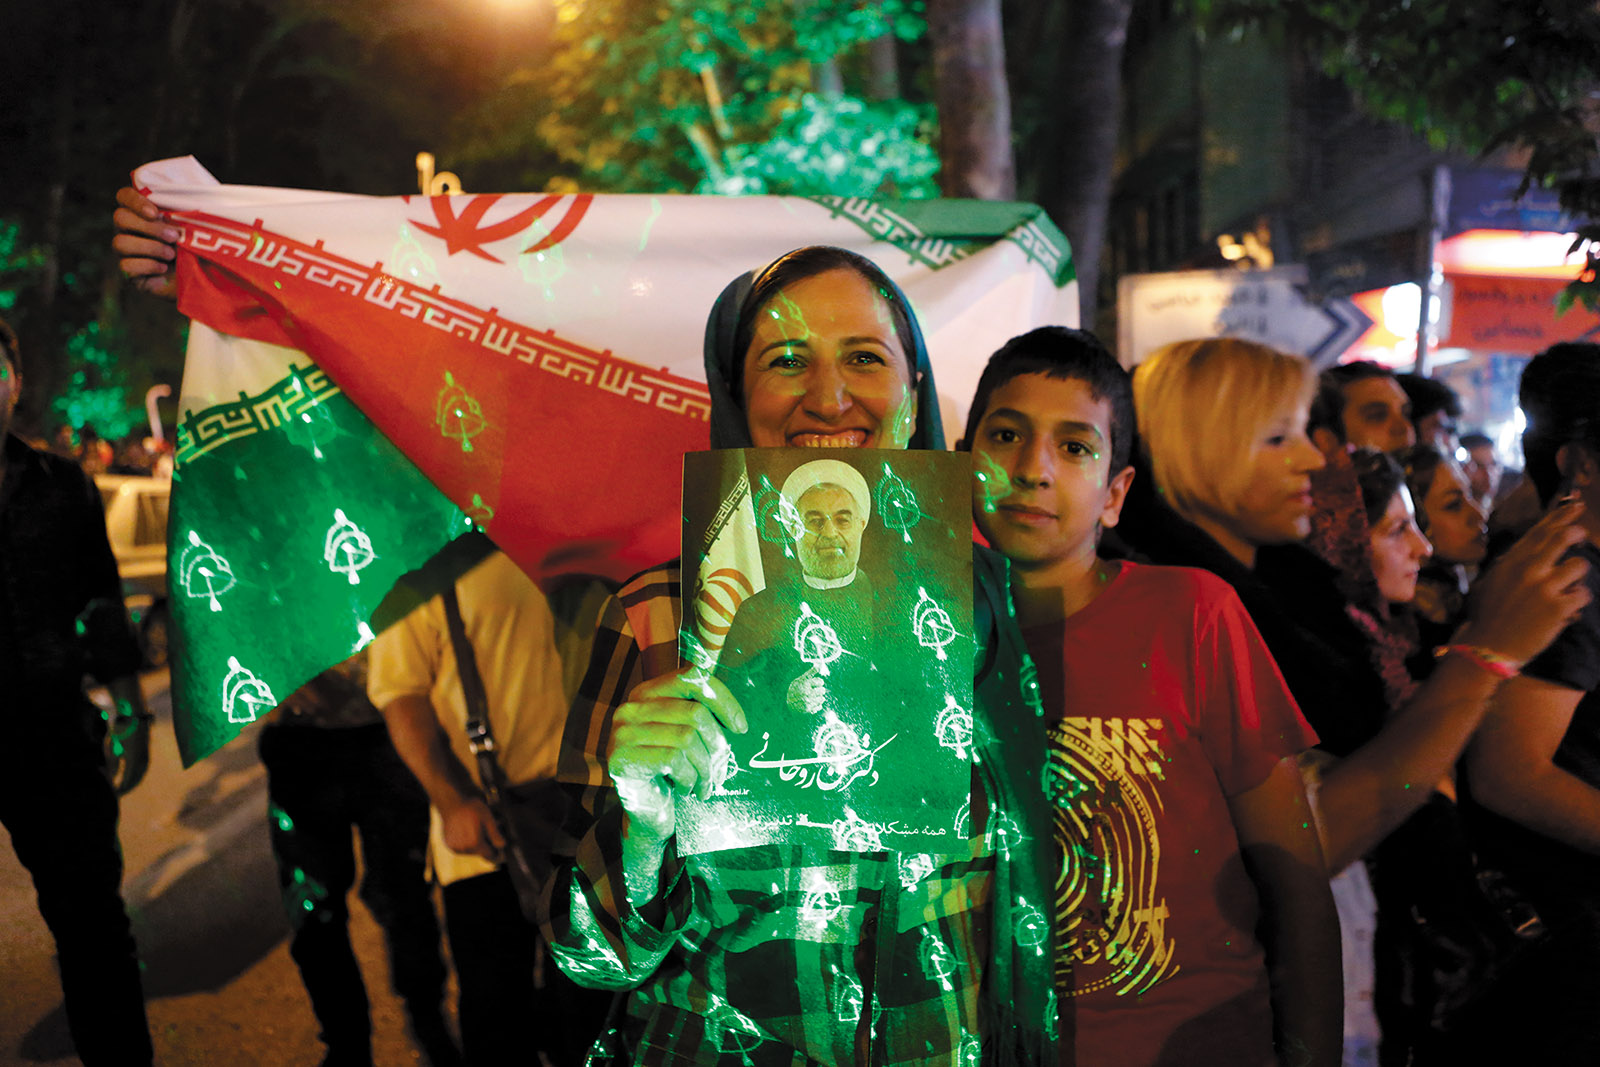 Iranians celebrating on the streets of Tehran following the announcement of the nuclear deal, July 2015